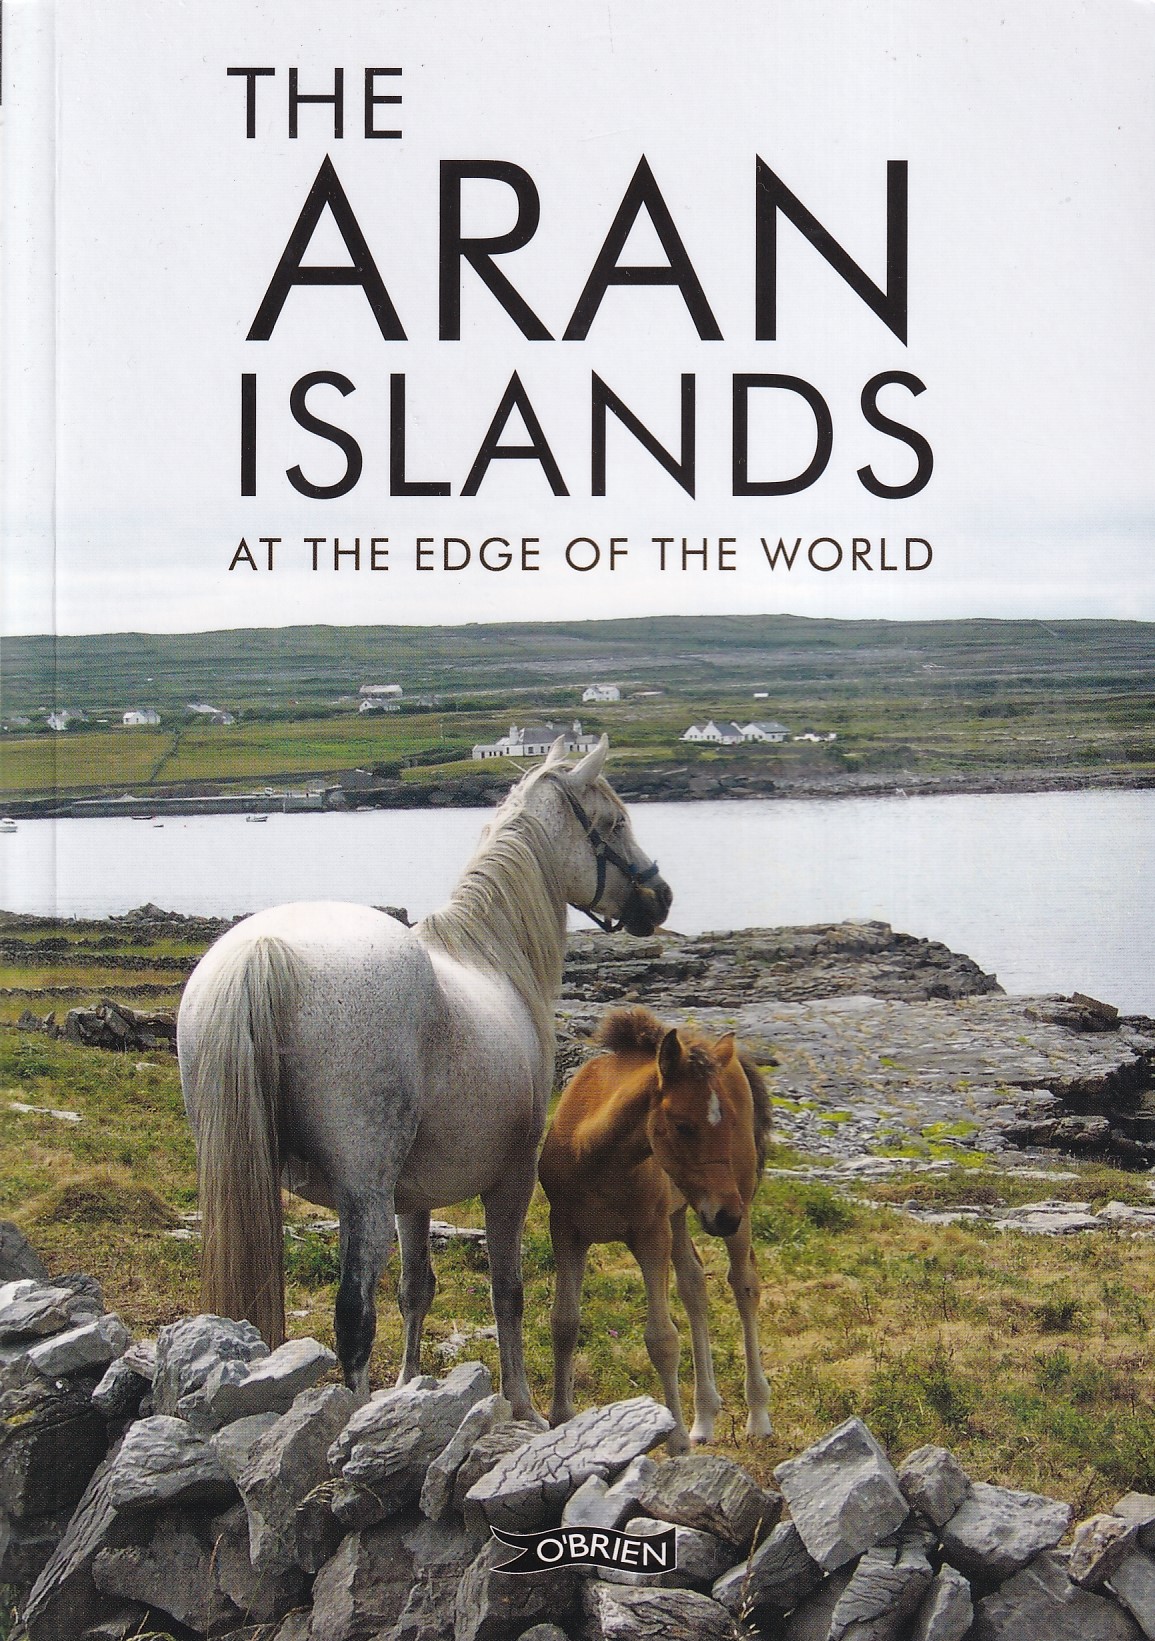 The Aran Islands: At the Edge of the World | The O'Brien Press | Charlie Byrne's